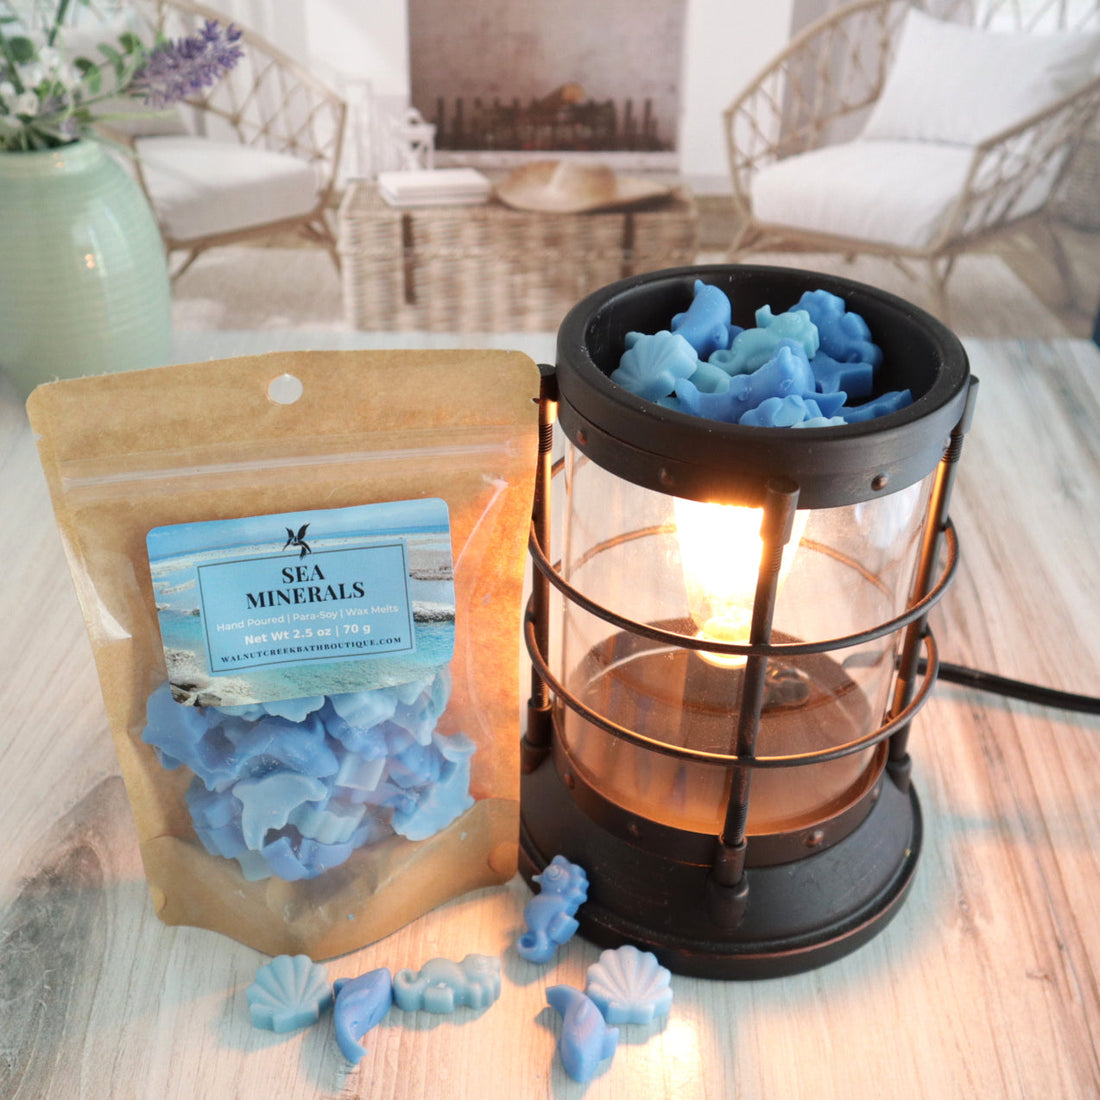 sea minerals wax melts are cute little pieces of wax. there are seashells, dolphins, seahorses and whales! some are lighter blue and some are darkers. the image has a bag of wax melts standing next to a lit burner full of these wax pieces while a sprinkling of them are also scattered on the table in front of the bag and burner.  this is all sitting on a washed out wooden base with a couple of chairs in the background next to a fireplace